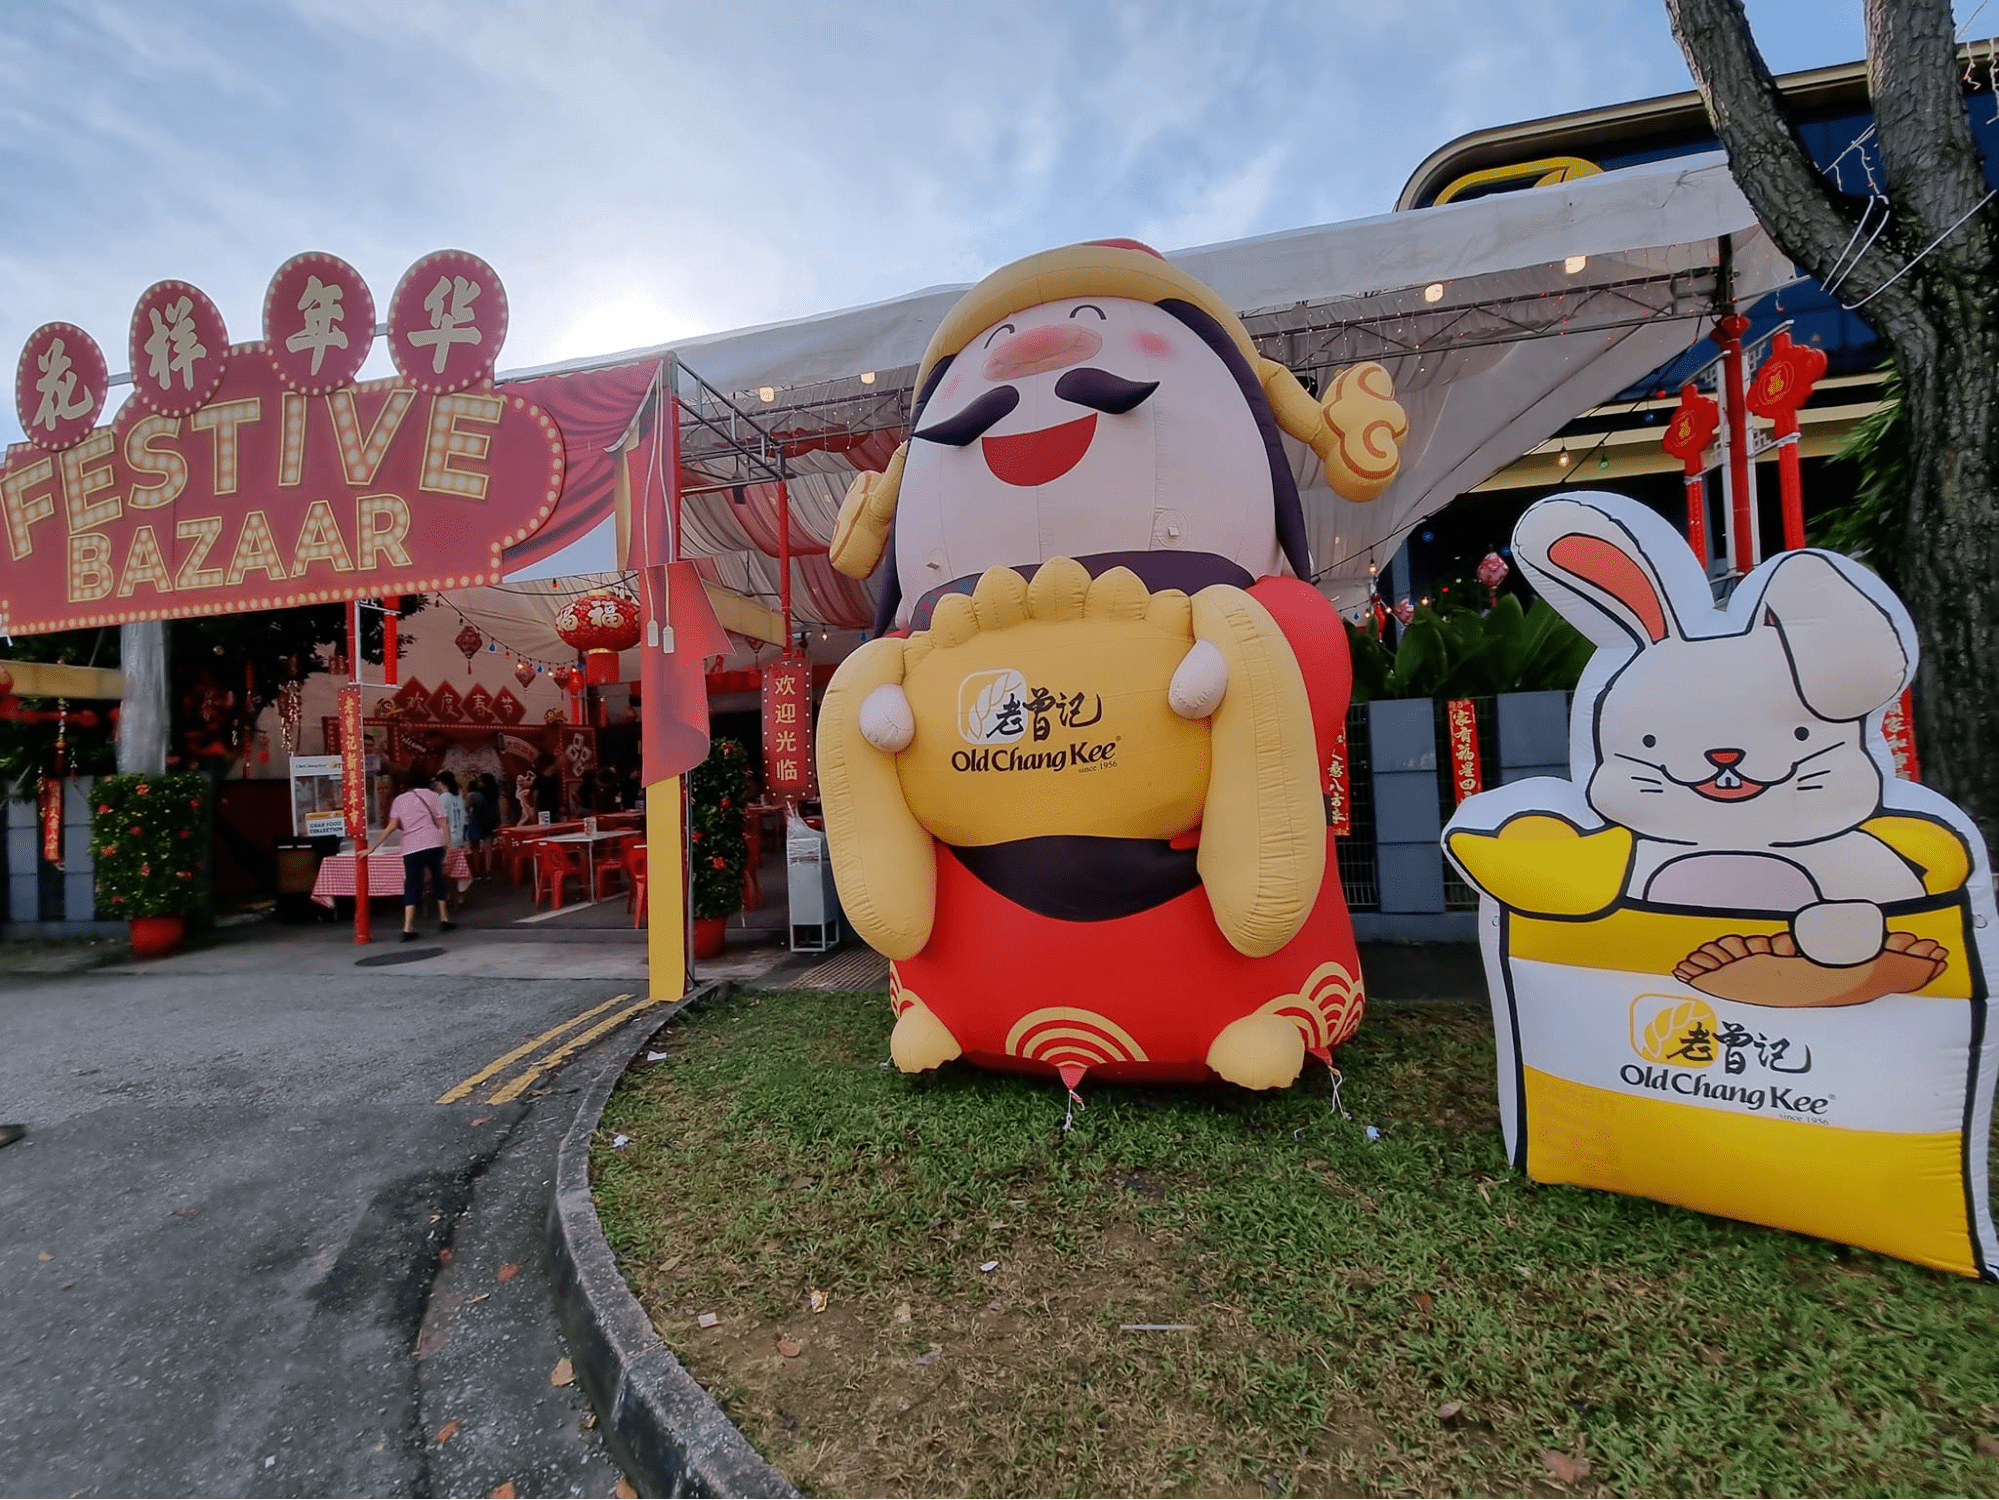 CNY Decorations & Events - Old Chang Kee festive bazaar